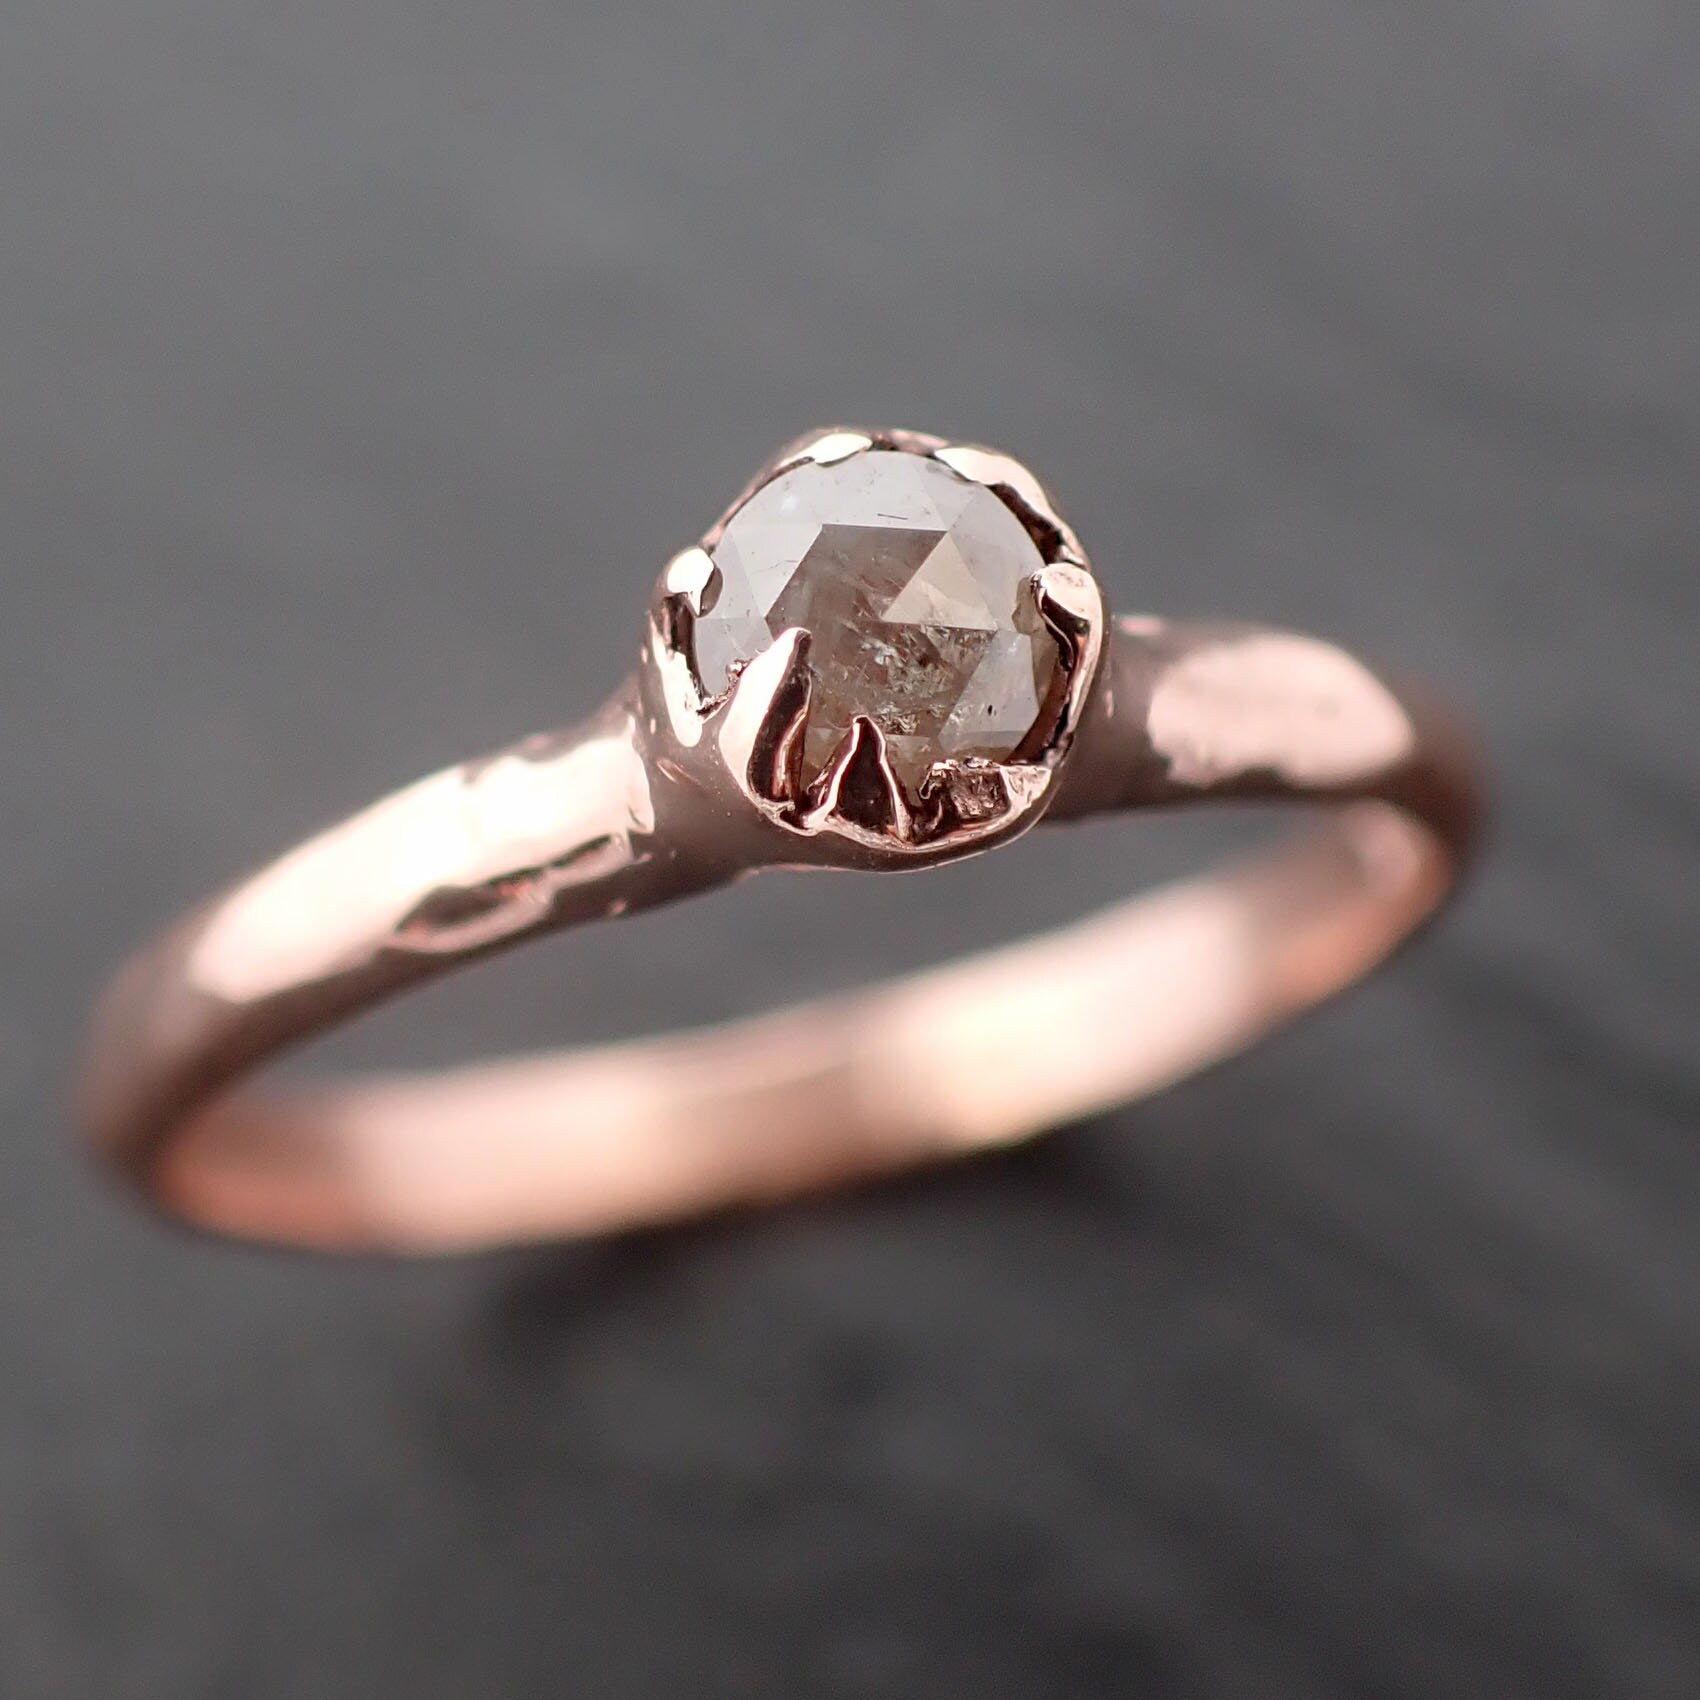 Faceted Fancy cut gray Diamond Solitaire Engagement 14k Rose Gold Wedding Ring byAngeline 3503